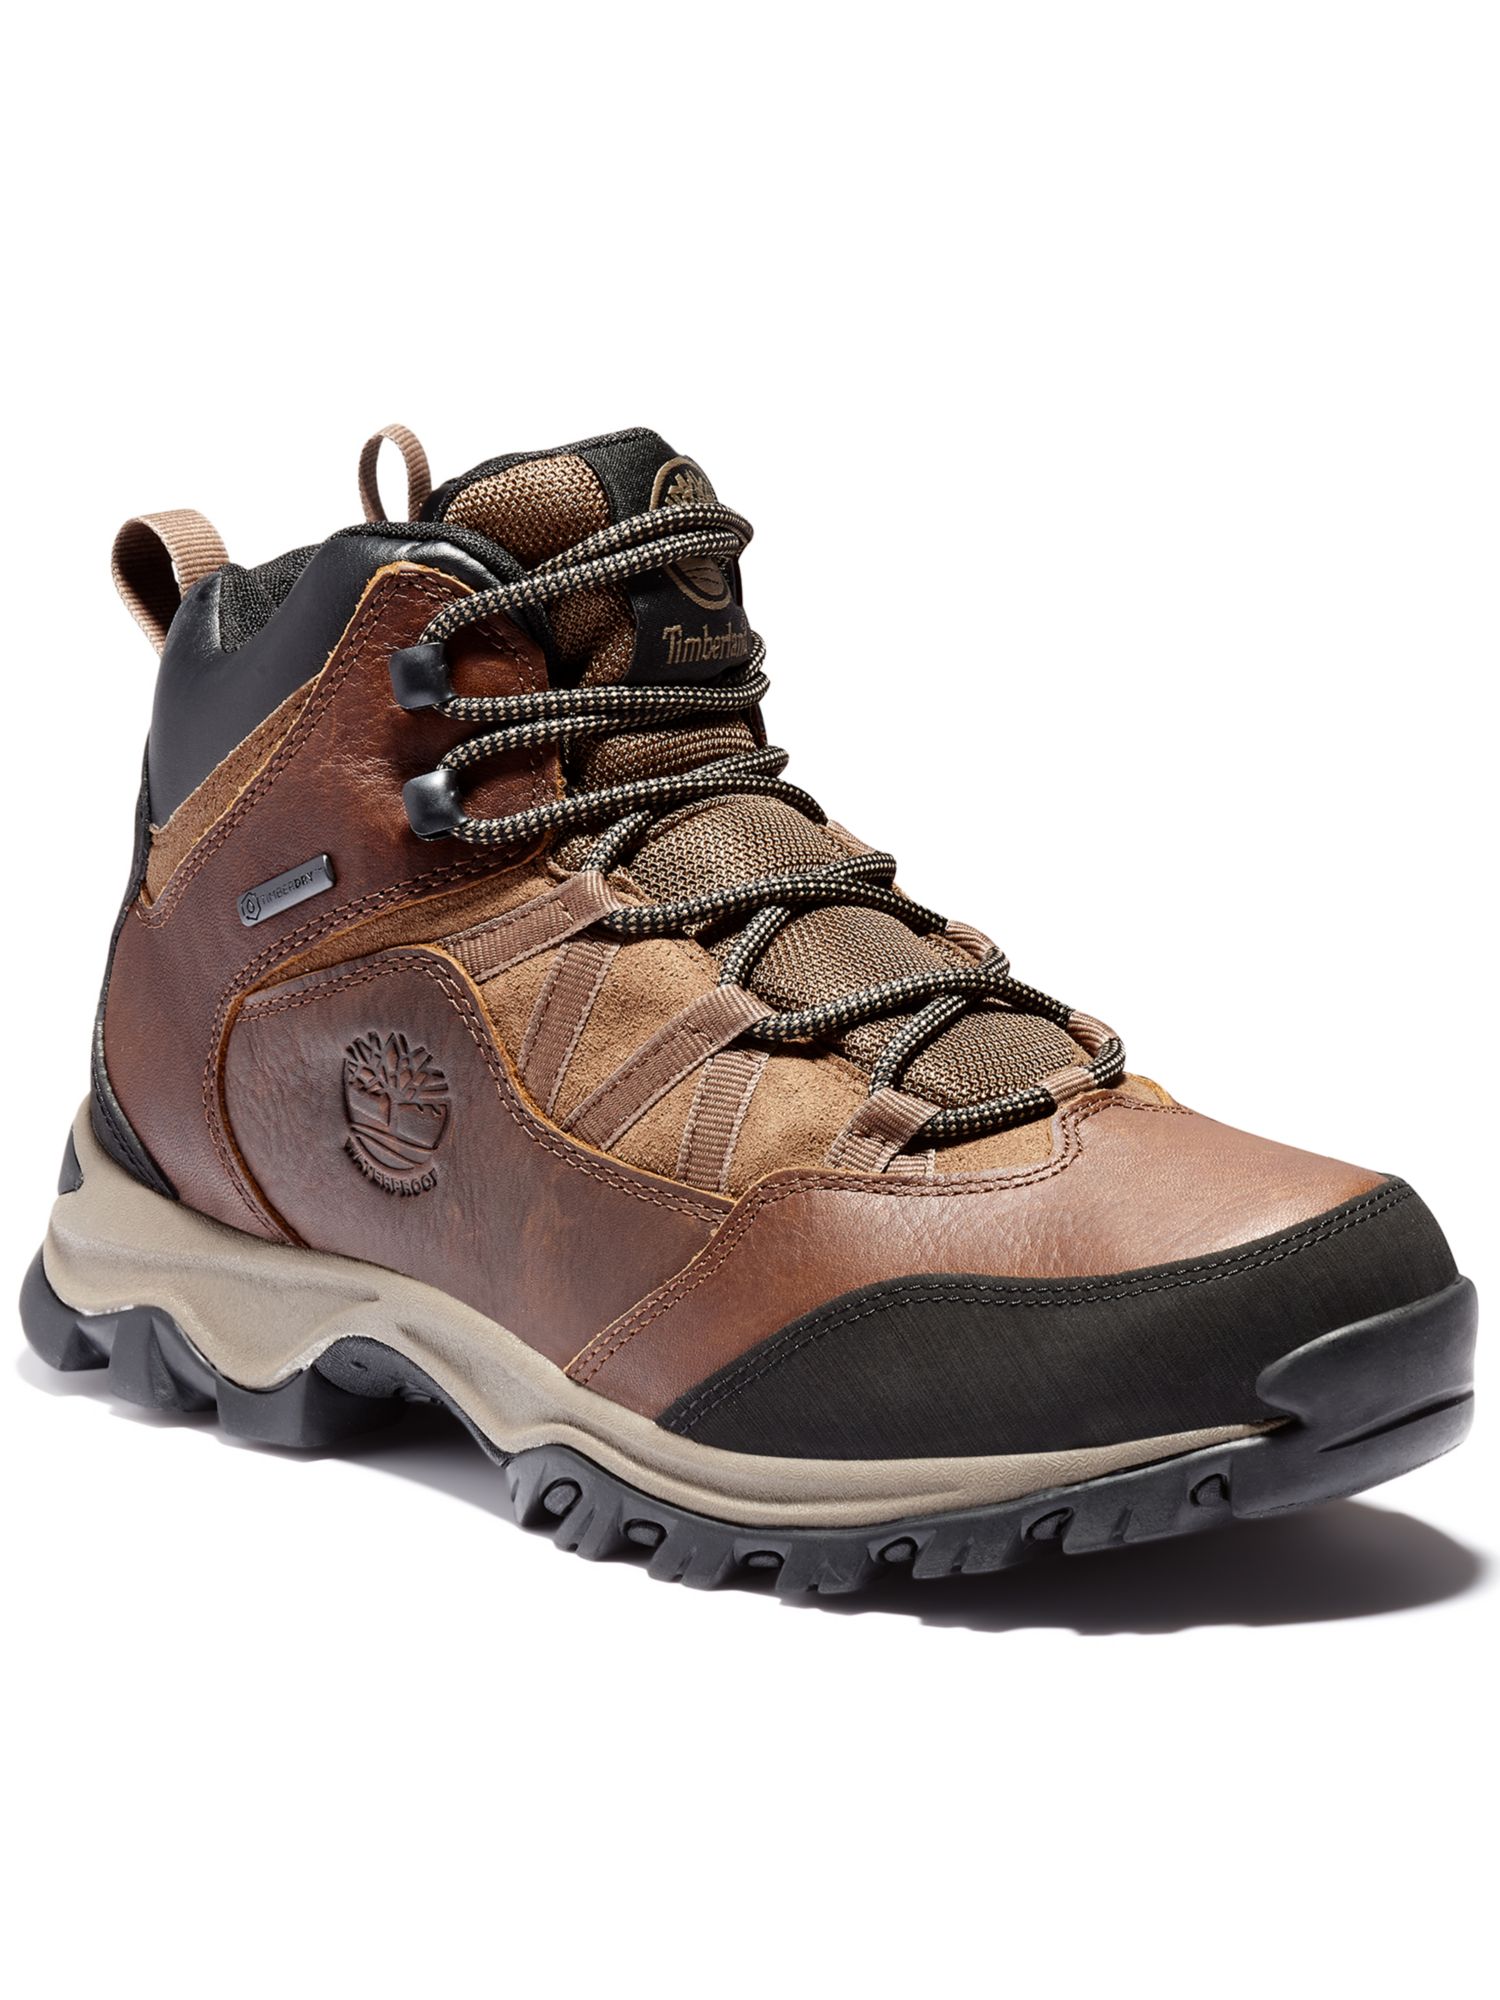 Timberland PRO TIMBERLAND Mens Brown Shock Absorption Water Resistant Comfort Mt. Major Round Toe Wedge Lace-Up Leather Hiking Boots 13 M